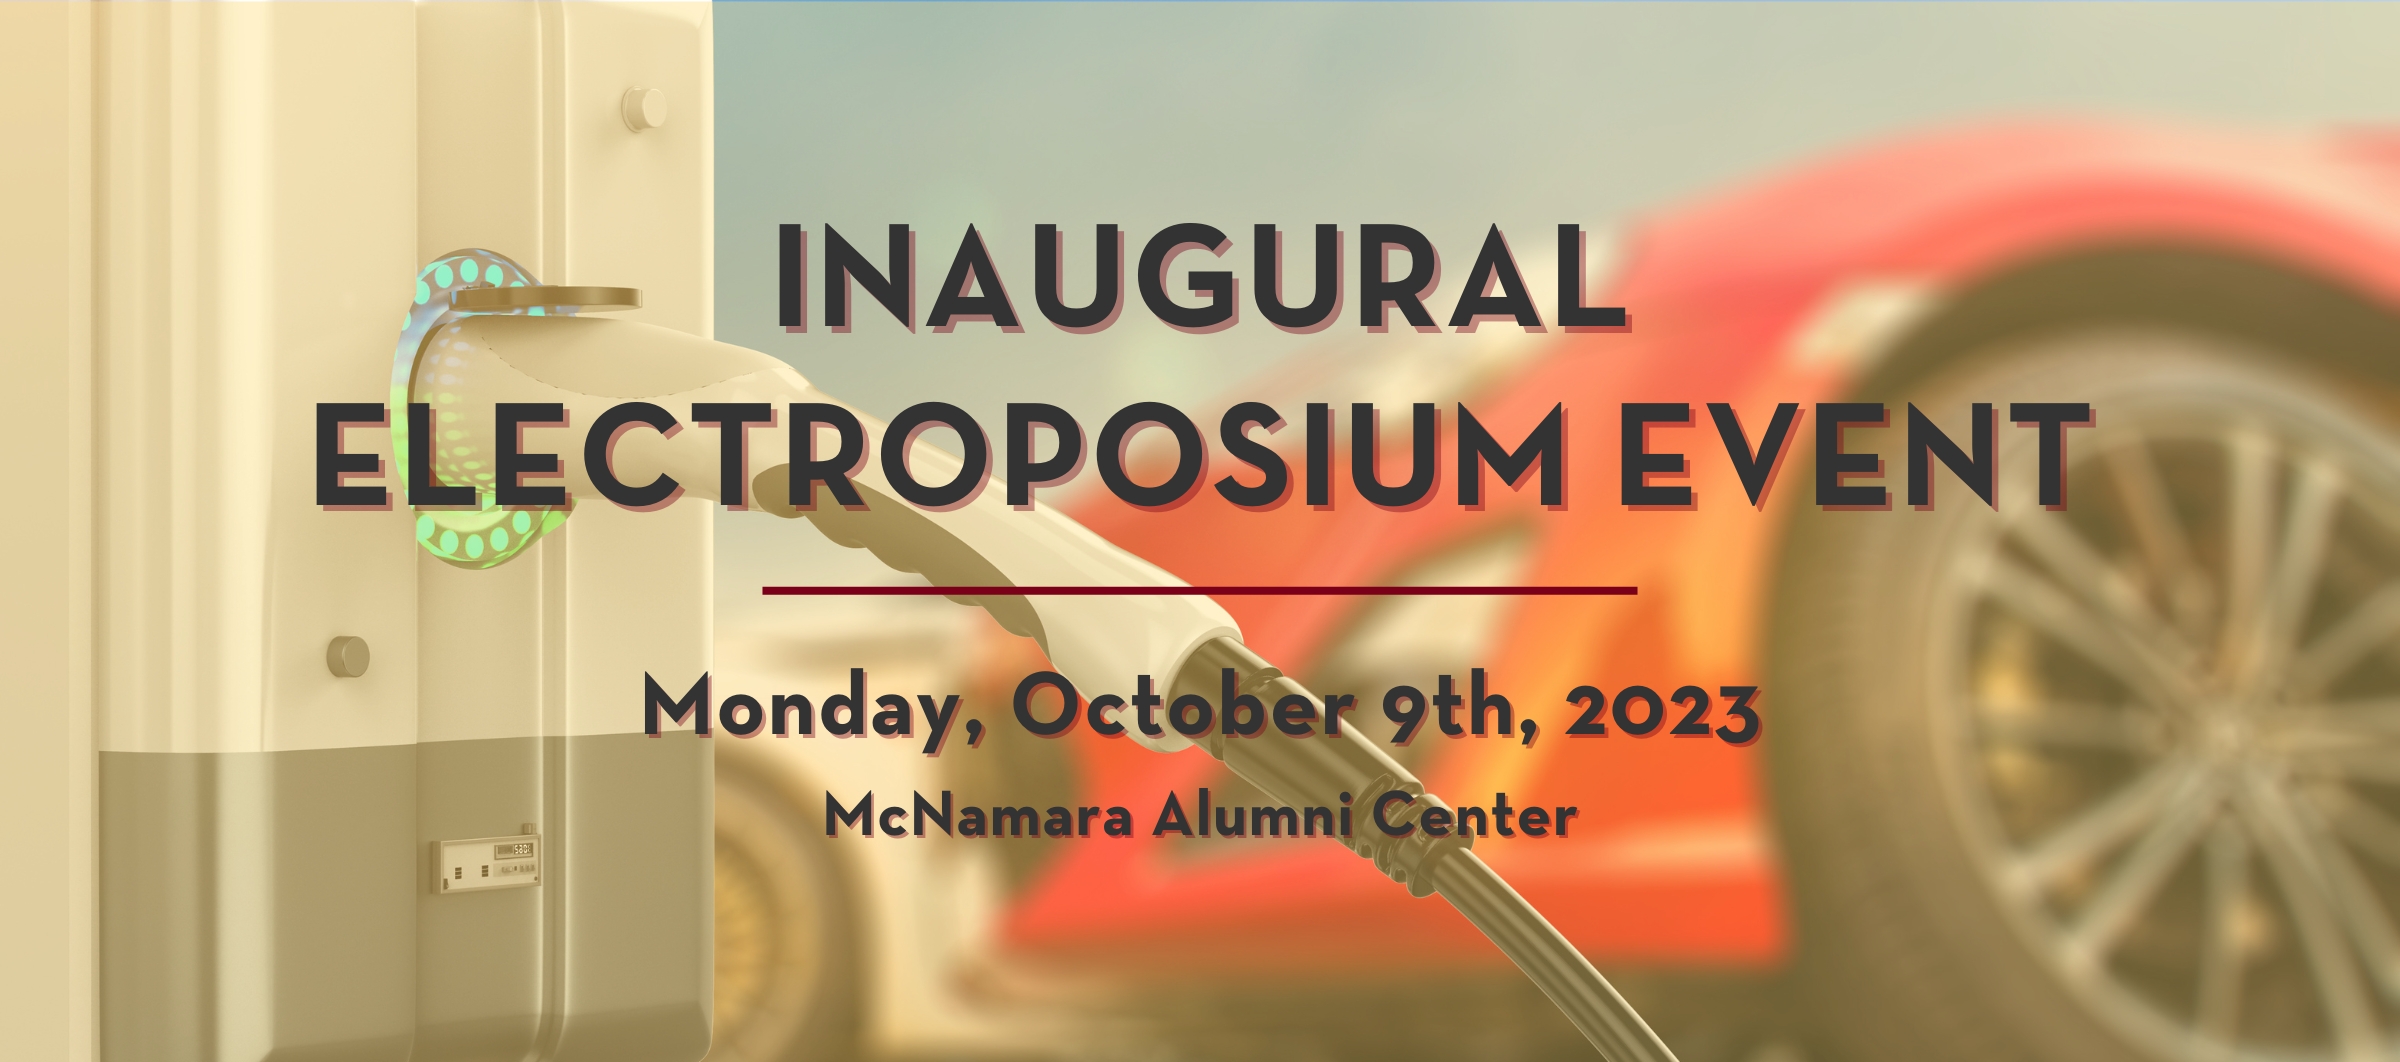 Inaugural Electroposium Event Banner